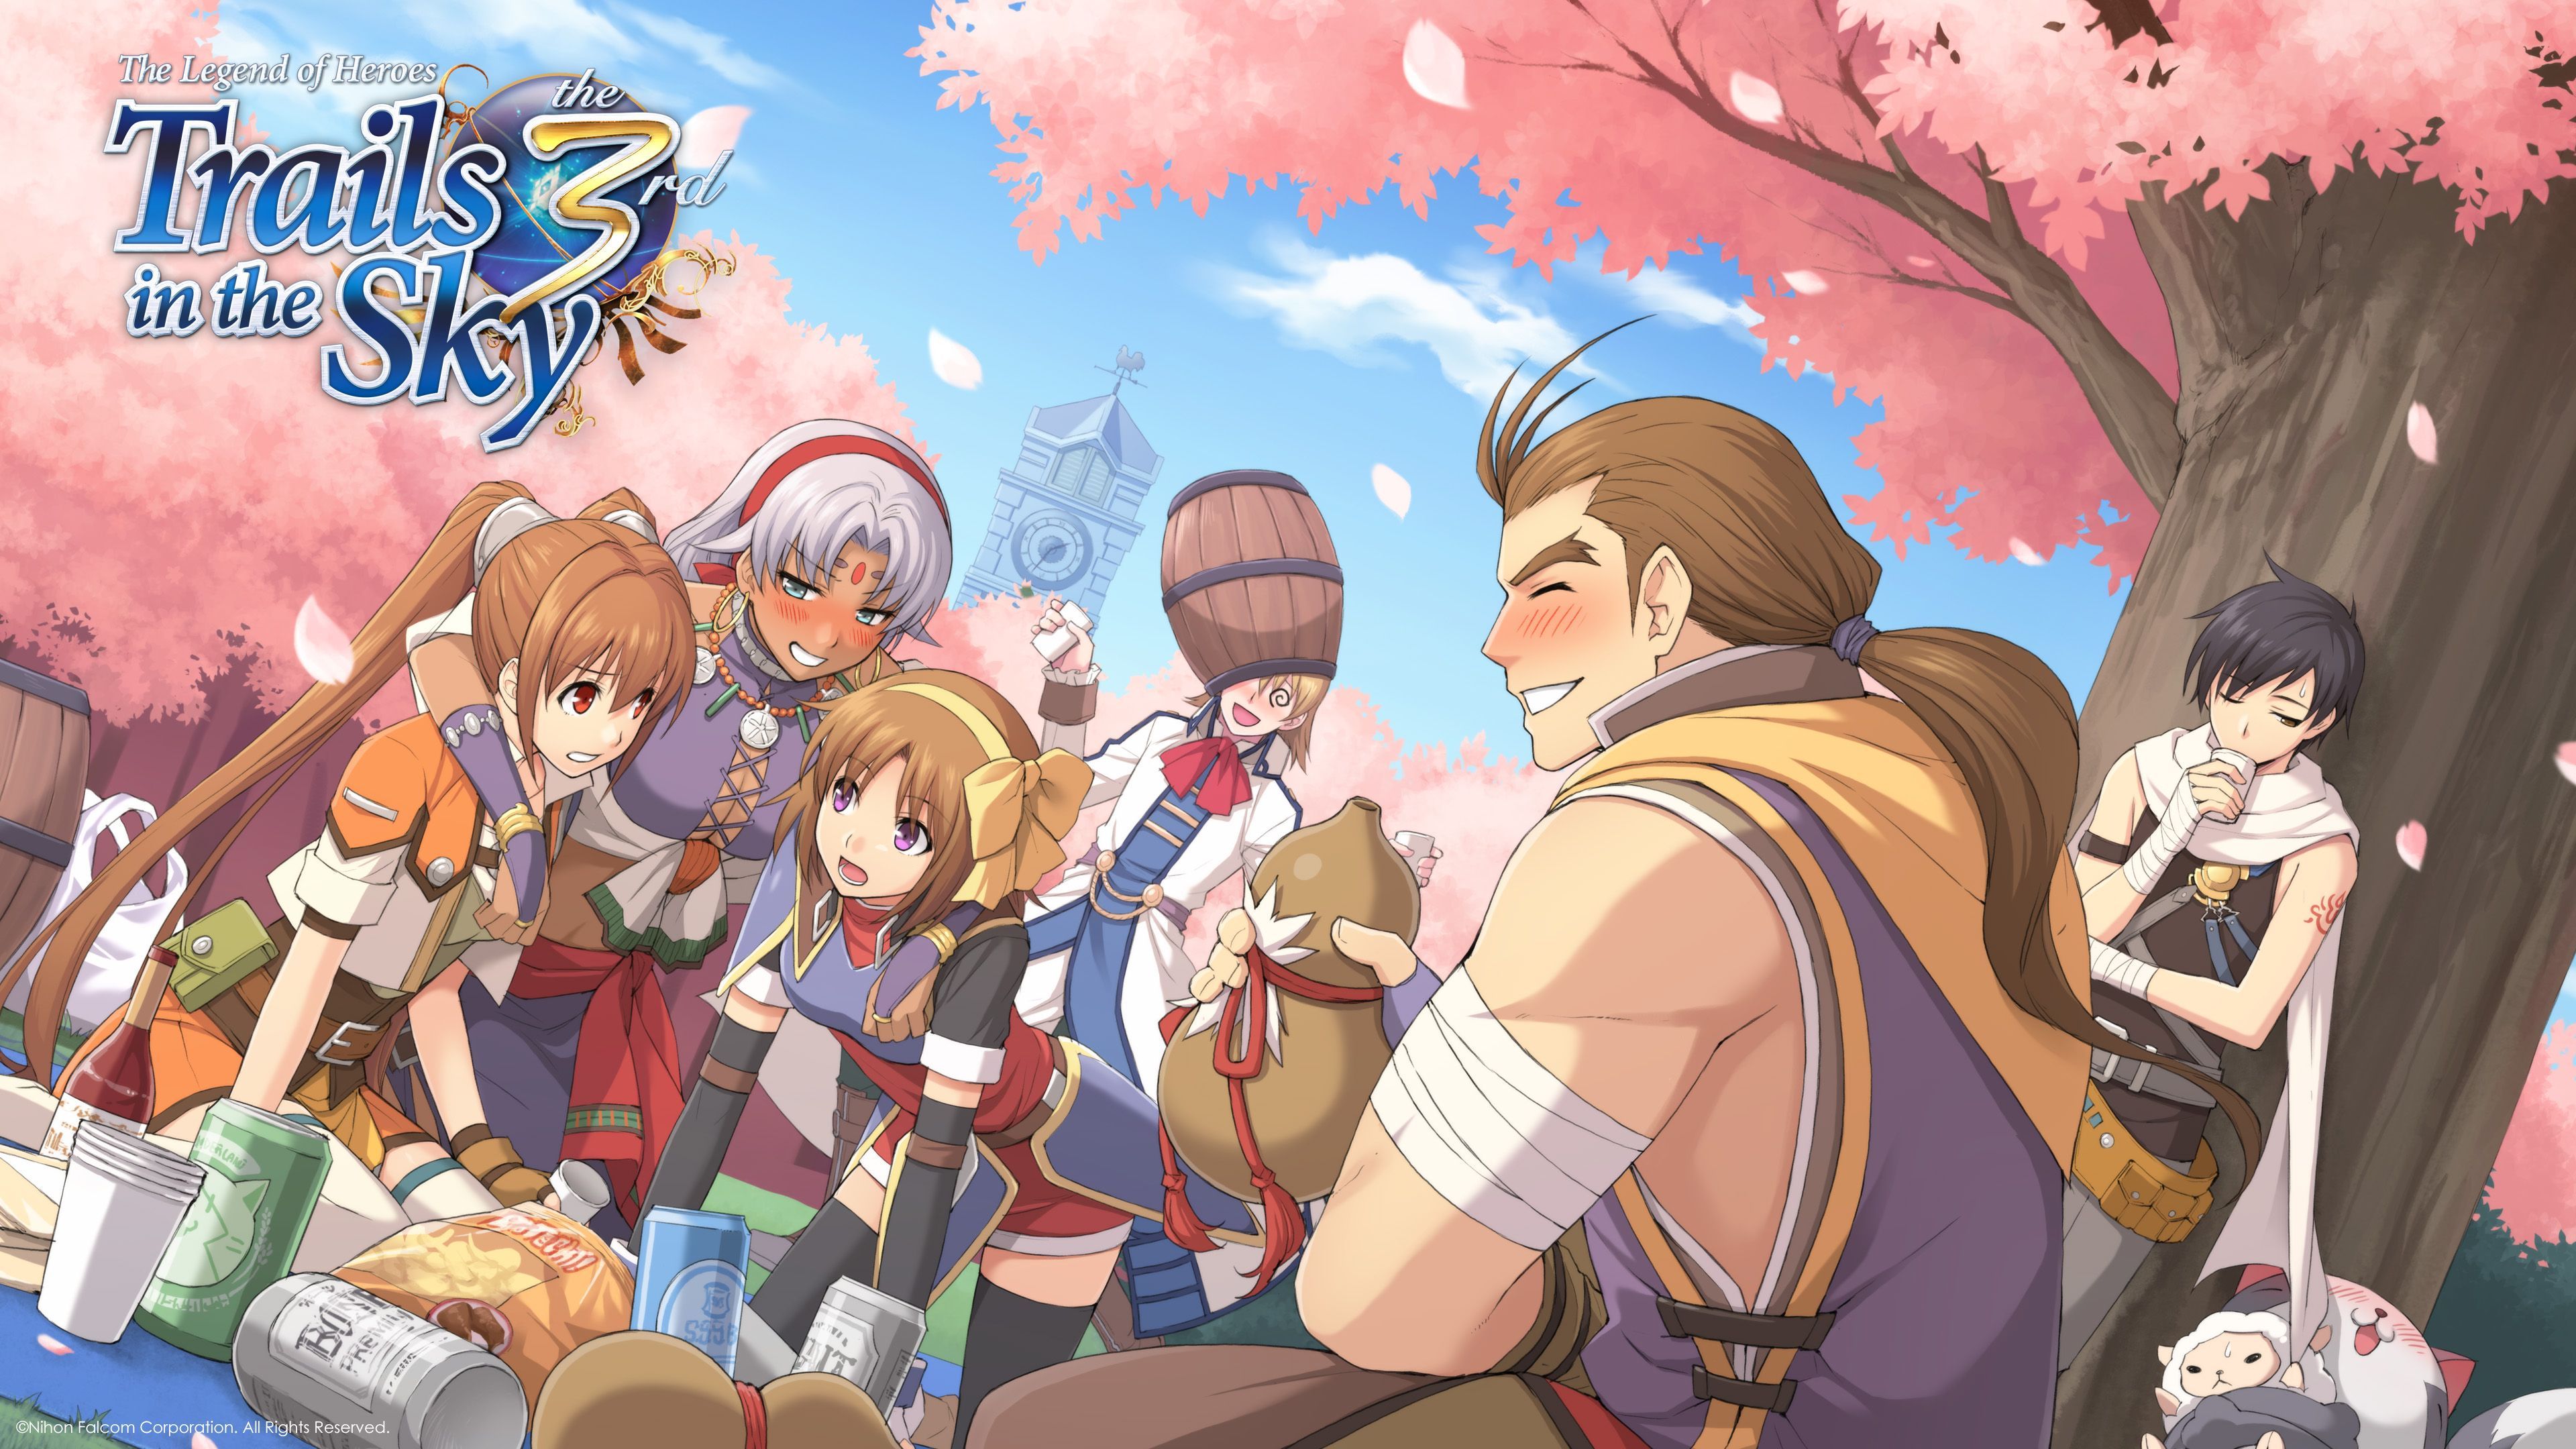 The Legend of Heroes Wallpaper Free The Legend of Heroes Background